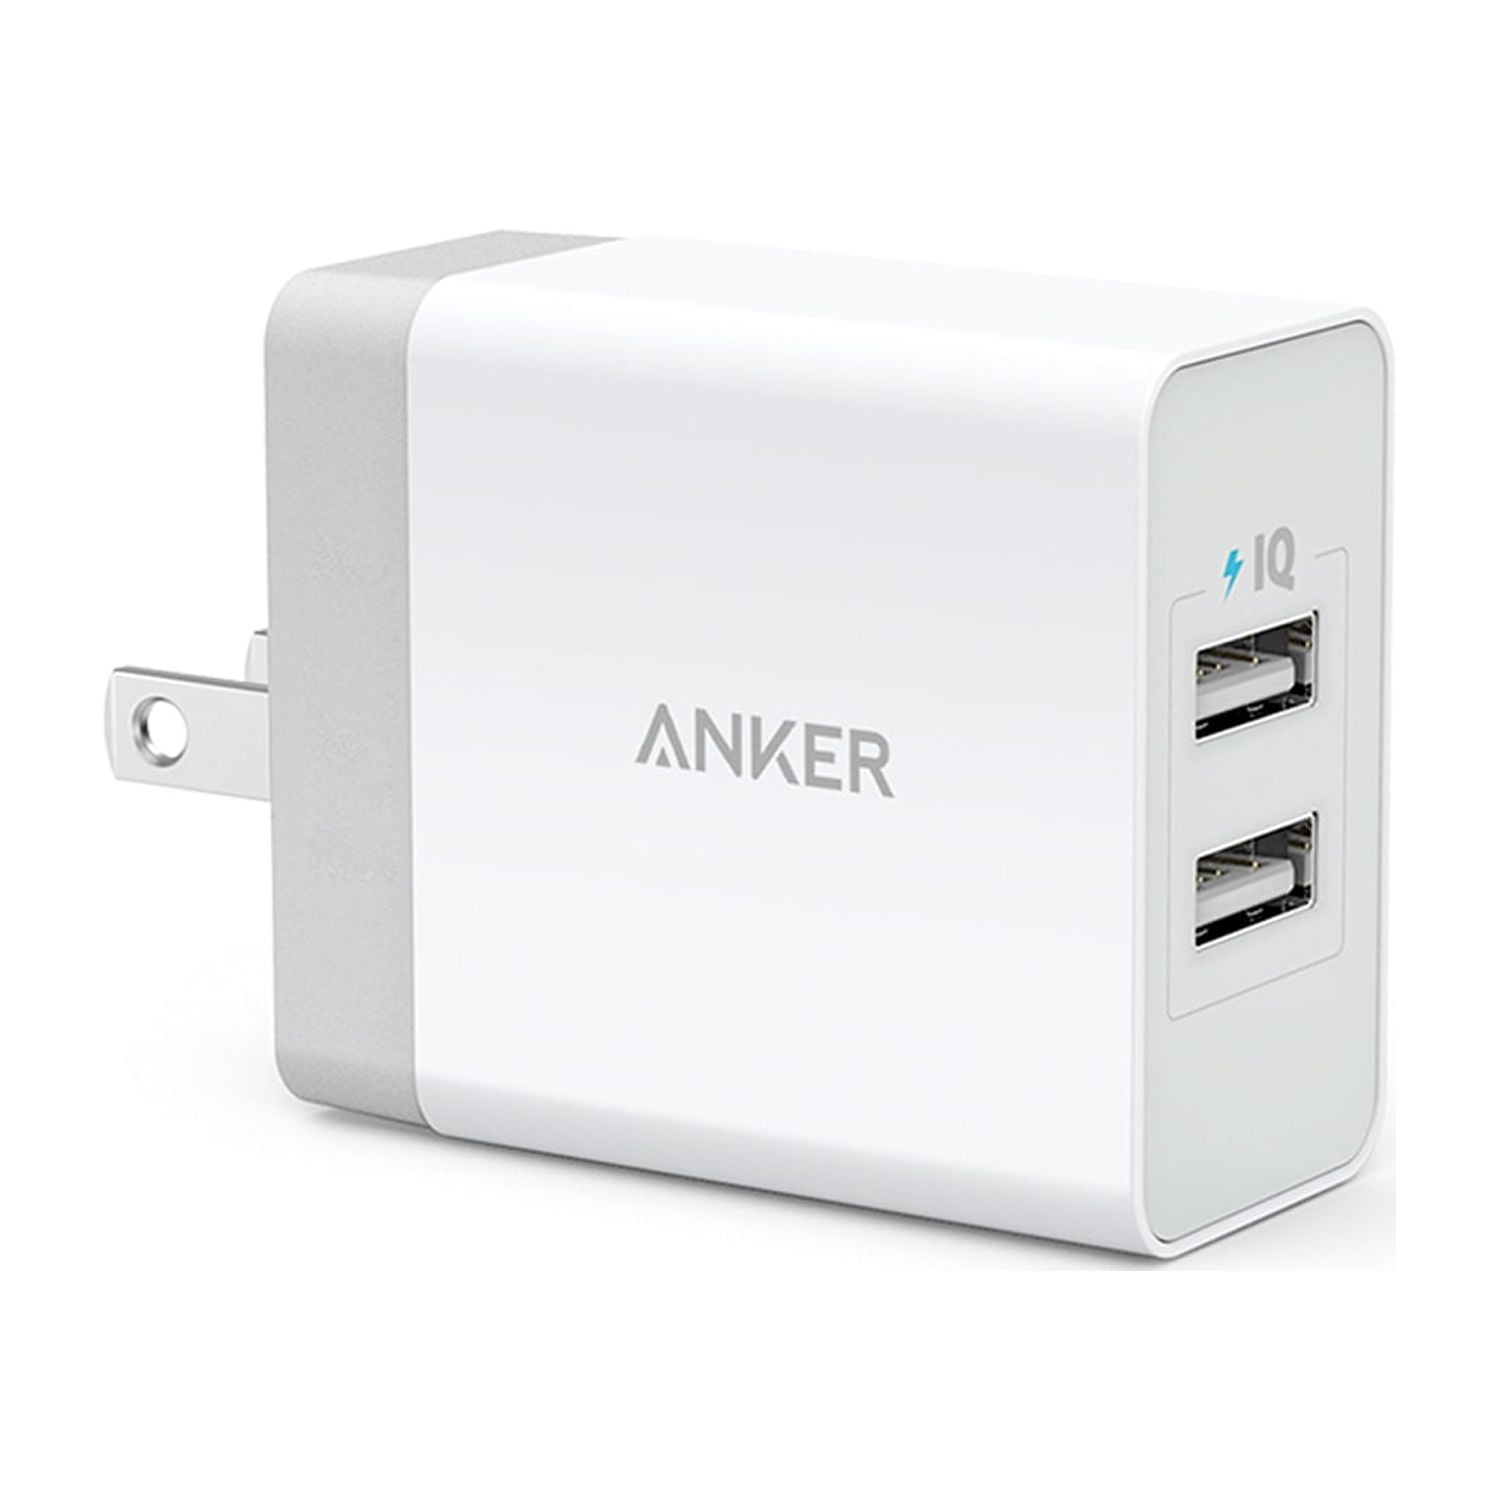 Anker Tech Anker 24W Dual-Port USB Wall Charger schwarz - Angebote ab 15,99  €